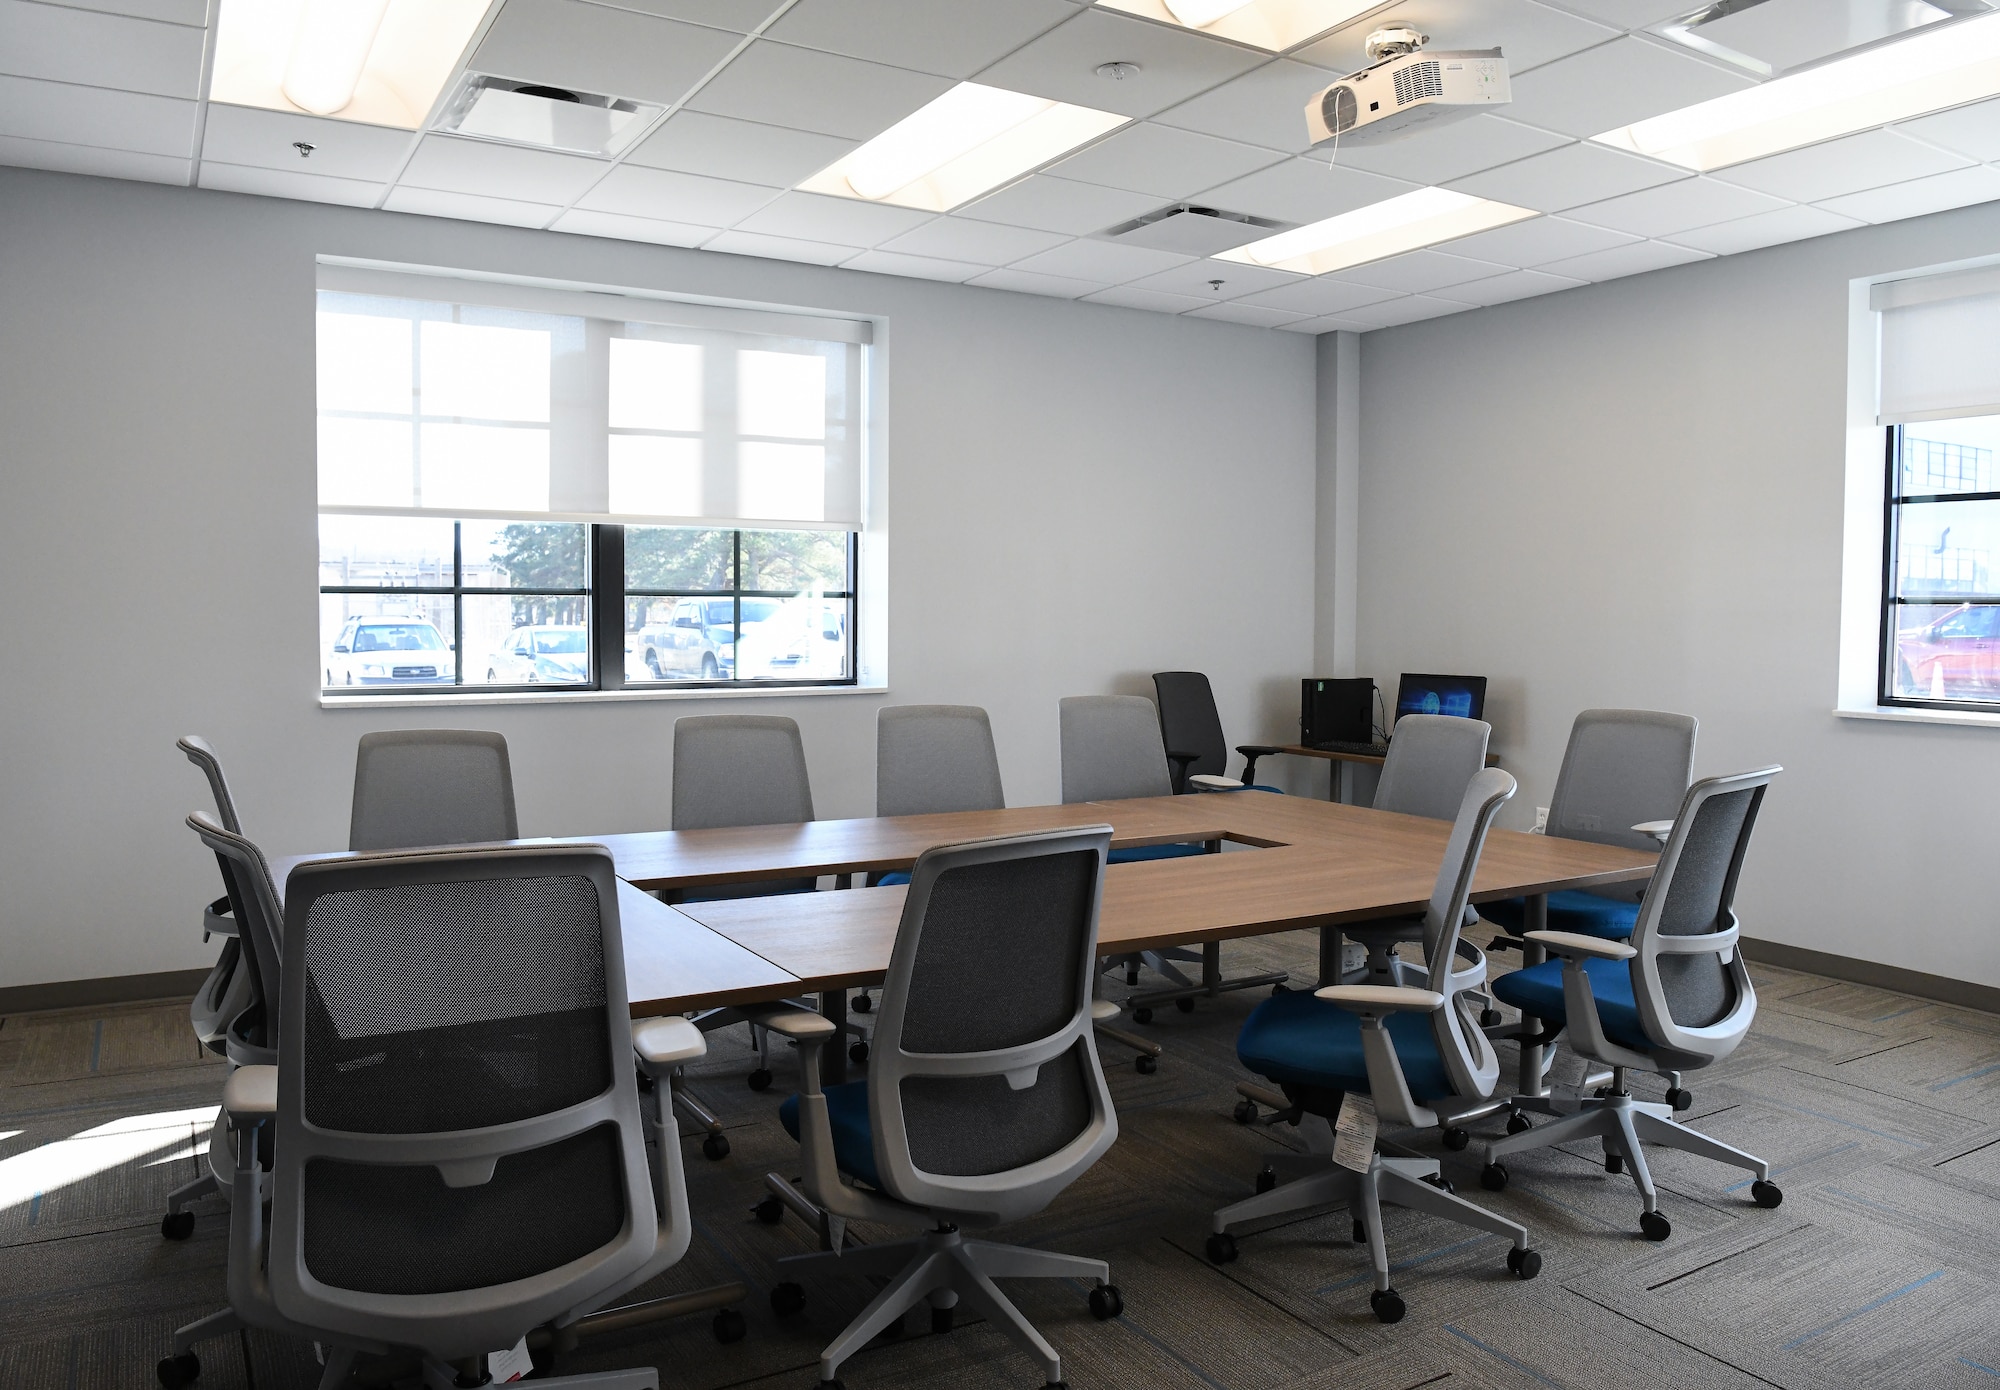 A conference room in the newly-renovated Civil Engineering, Operations and Maintenance Building at Arnold Air Force Base, Tenn., is shown in this photo Jan. 6. (U.S. Air Force photo by Jill Pickett)